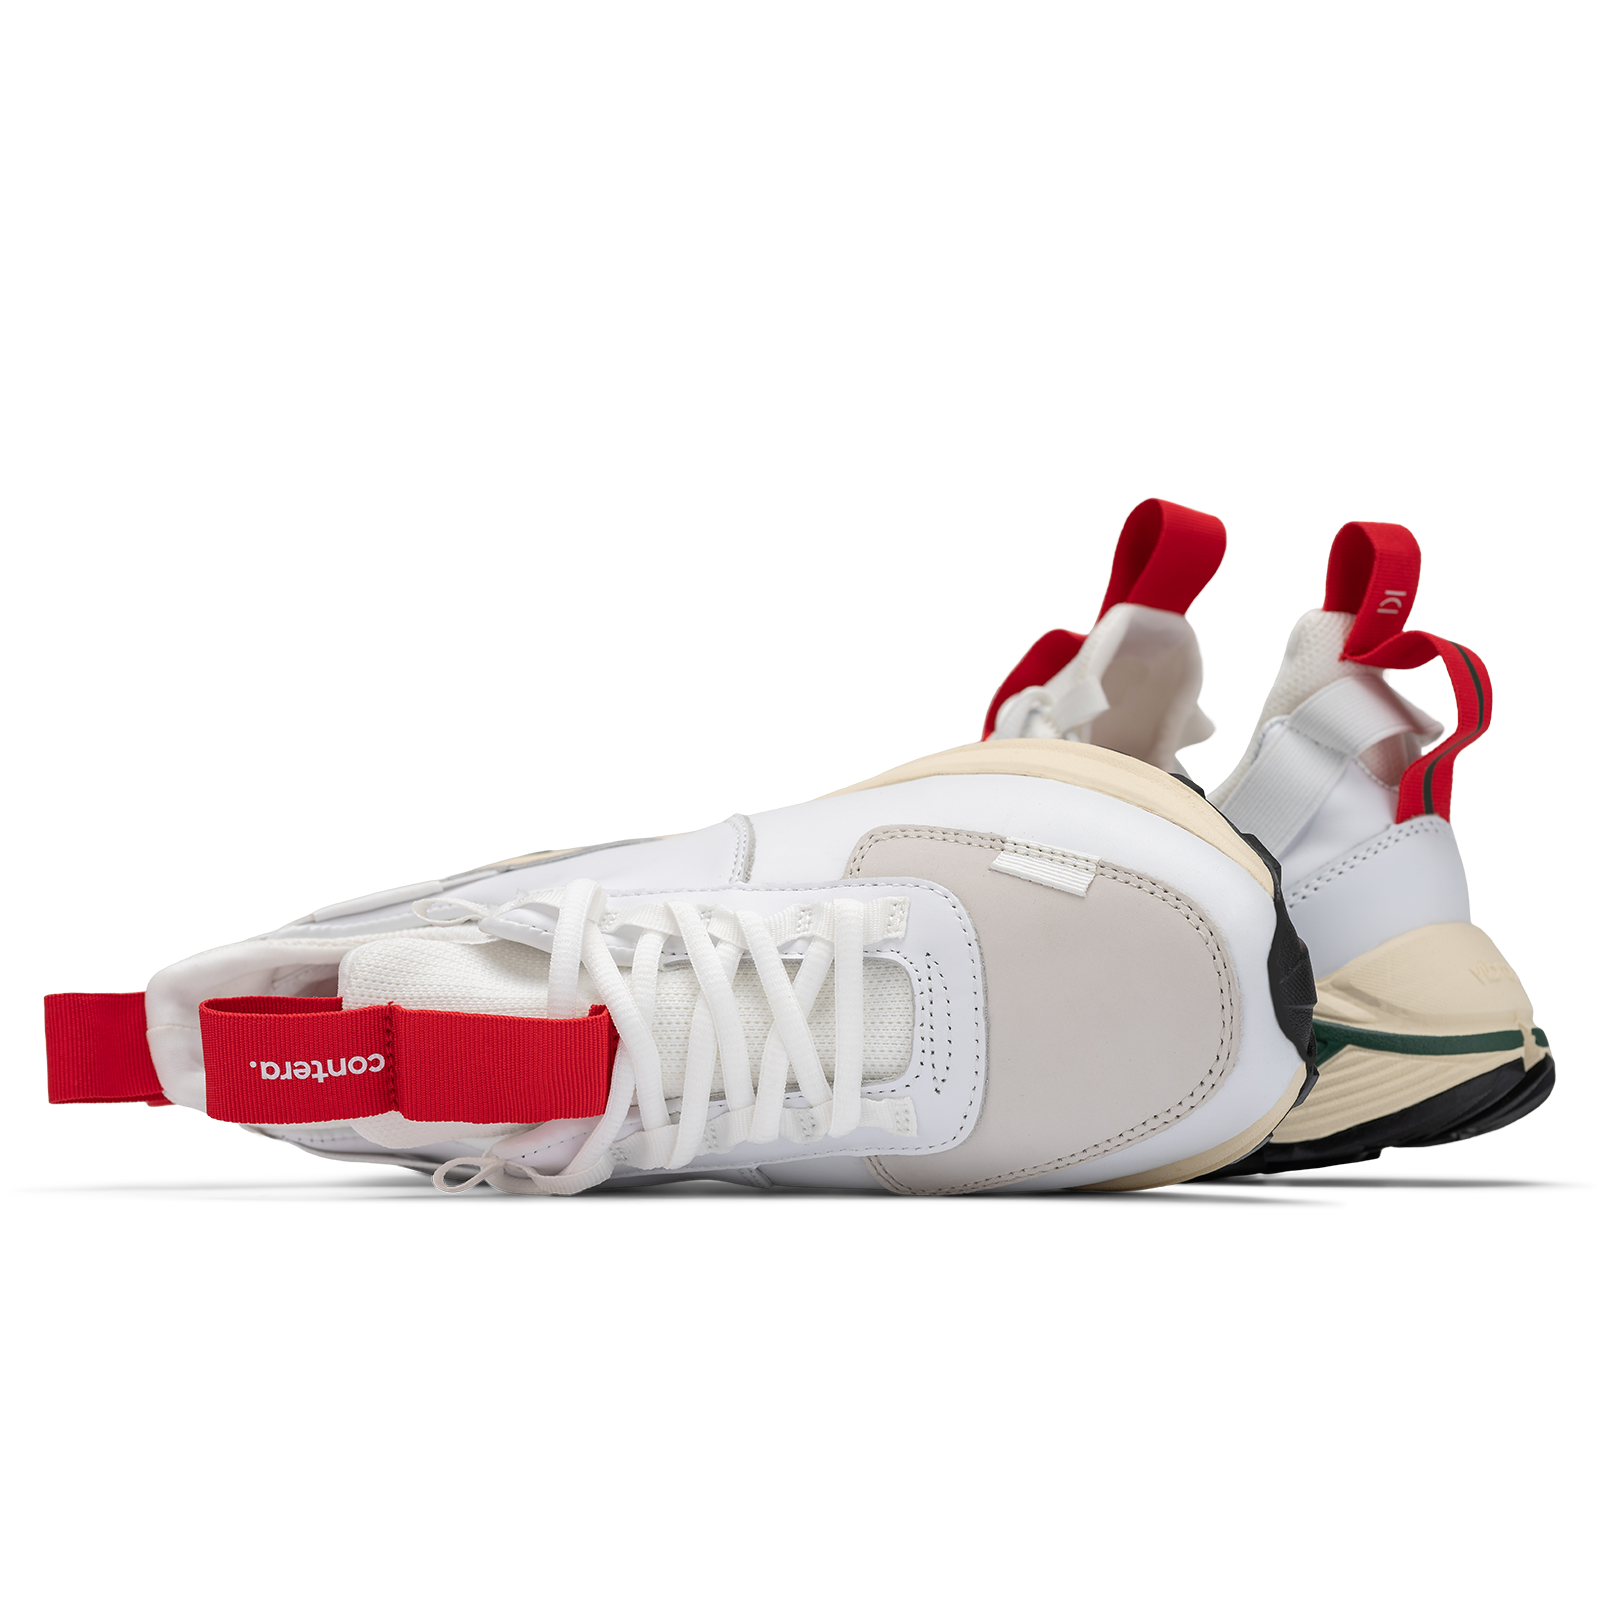 Top and back vew, Contera Cloud Forest is a runner with White fullgrain and Nubuck leather overlays White stretch mesh underlays, Red webbing heel and tongue pull, webbing lace system gream and green Virbam midsole and black vibram rubber outsole.